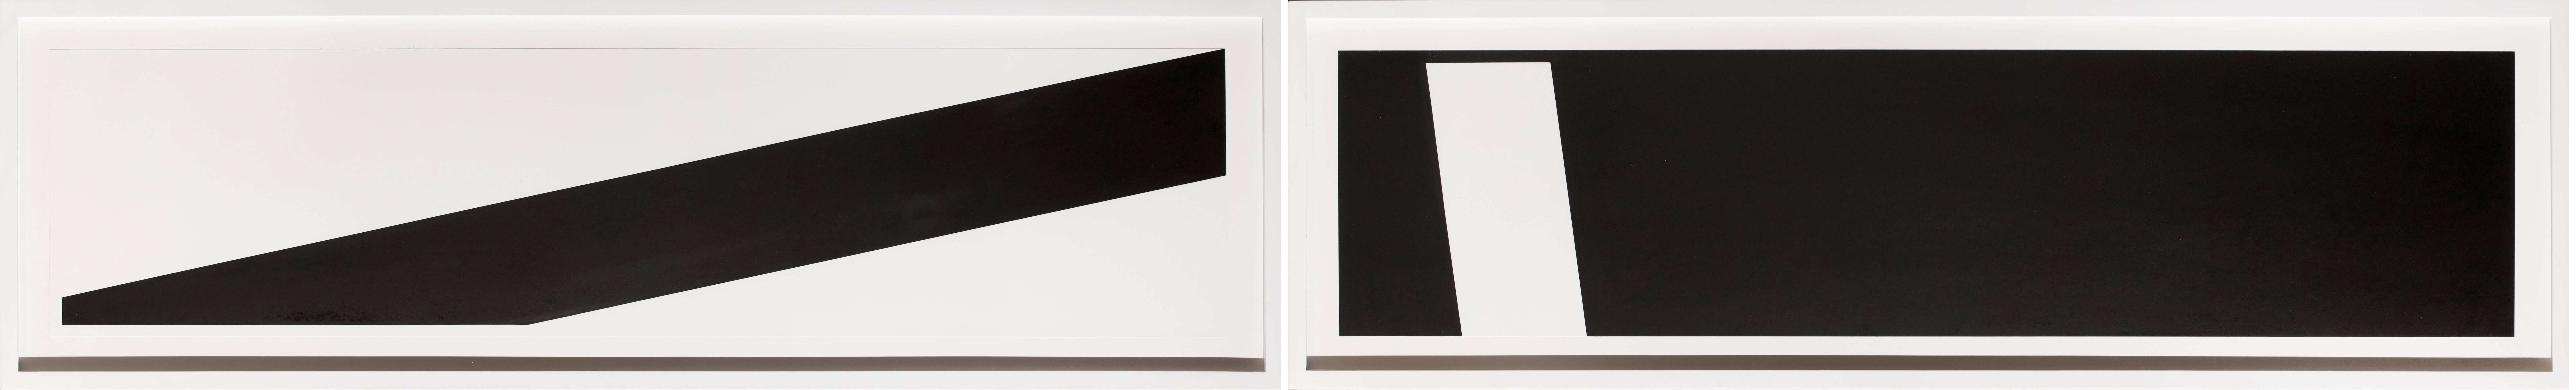 George Thiewes Abstract Drawing - Untitled G (diptych) 